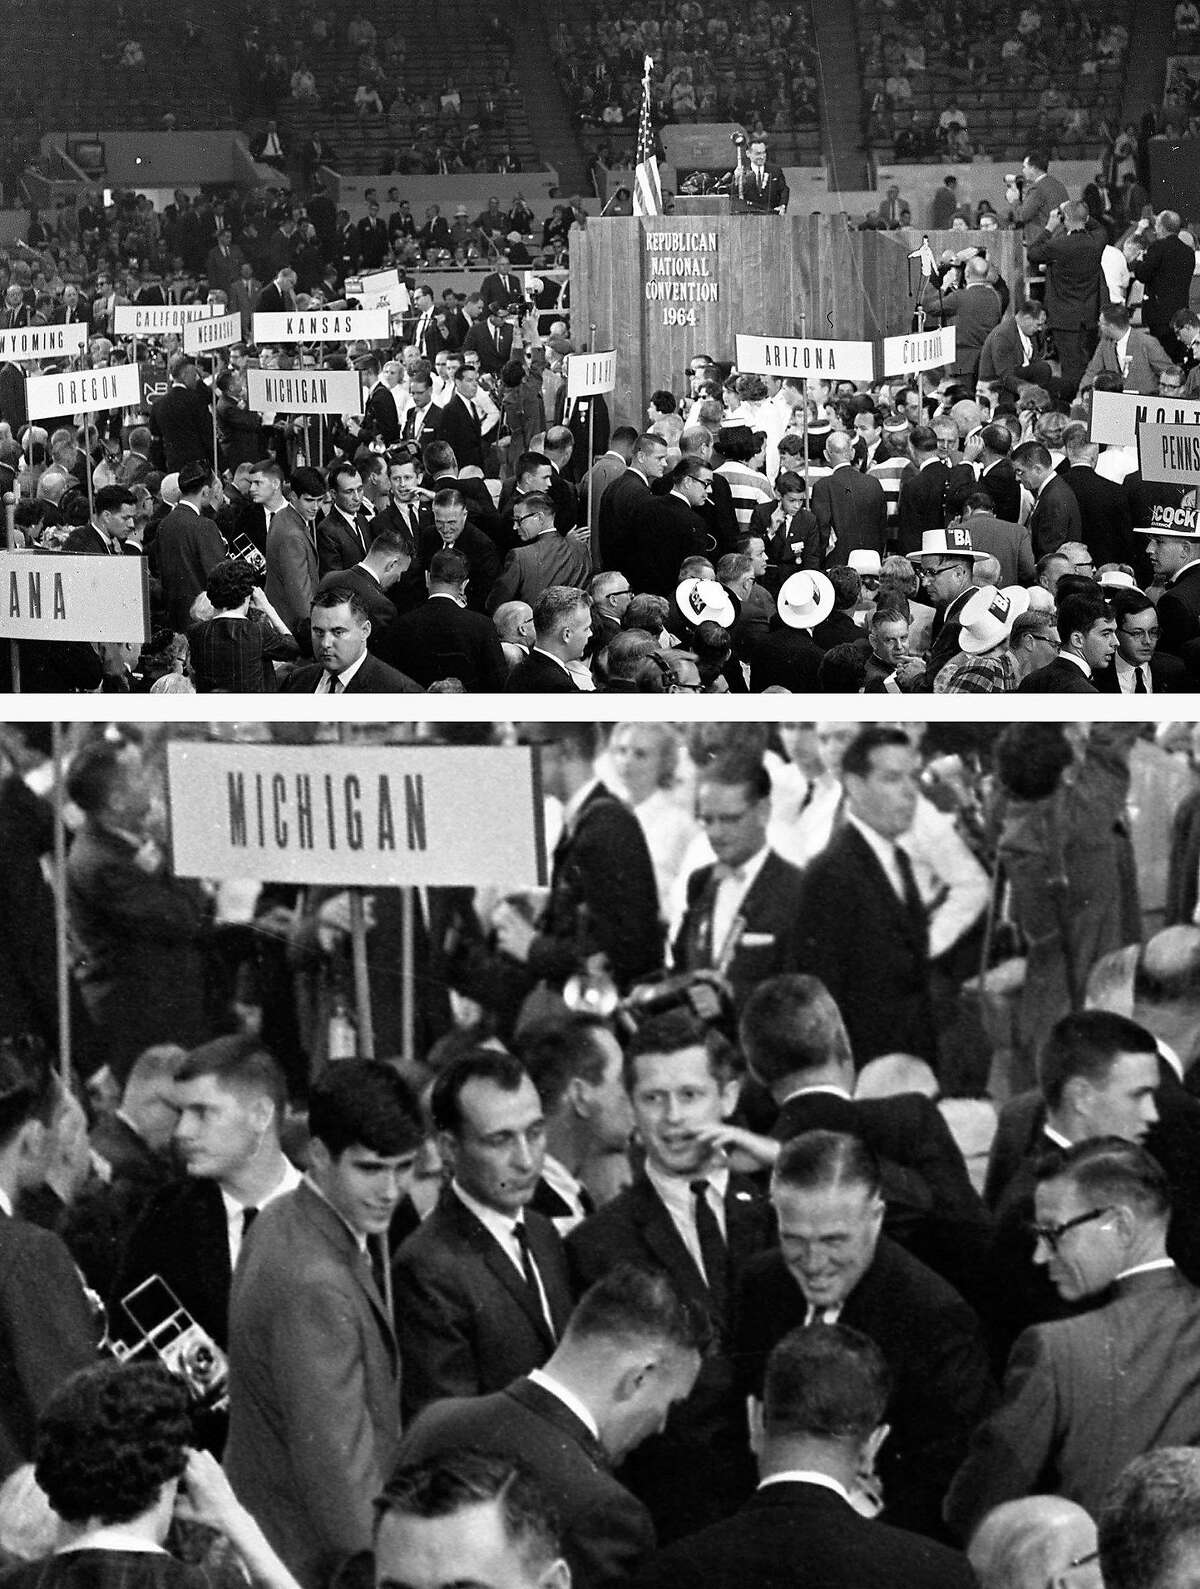 July 14, 1964: A wide shot and close-up of the 1964 GOP Convention floor, where 17-year-old Mitt Romney (bottom left) listens to his father George Romney (bottom right), who disagreed with nominee Barry Goldwater over civil rights.